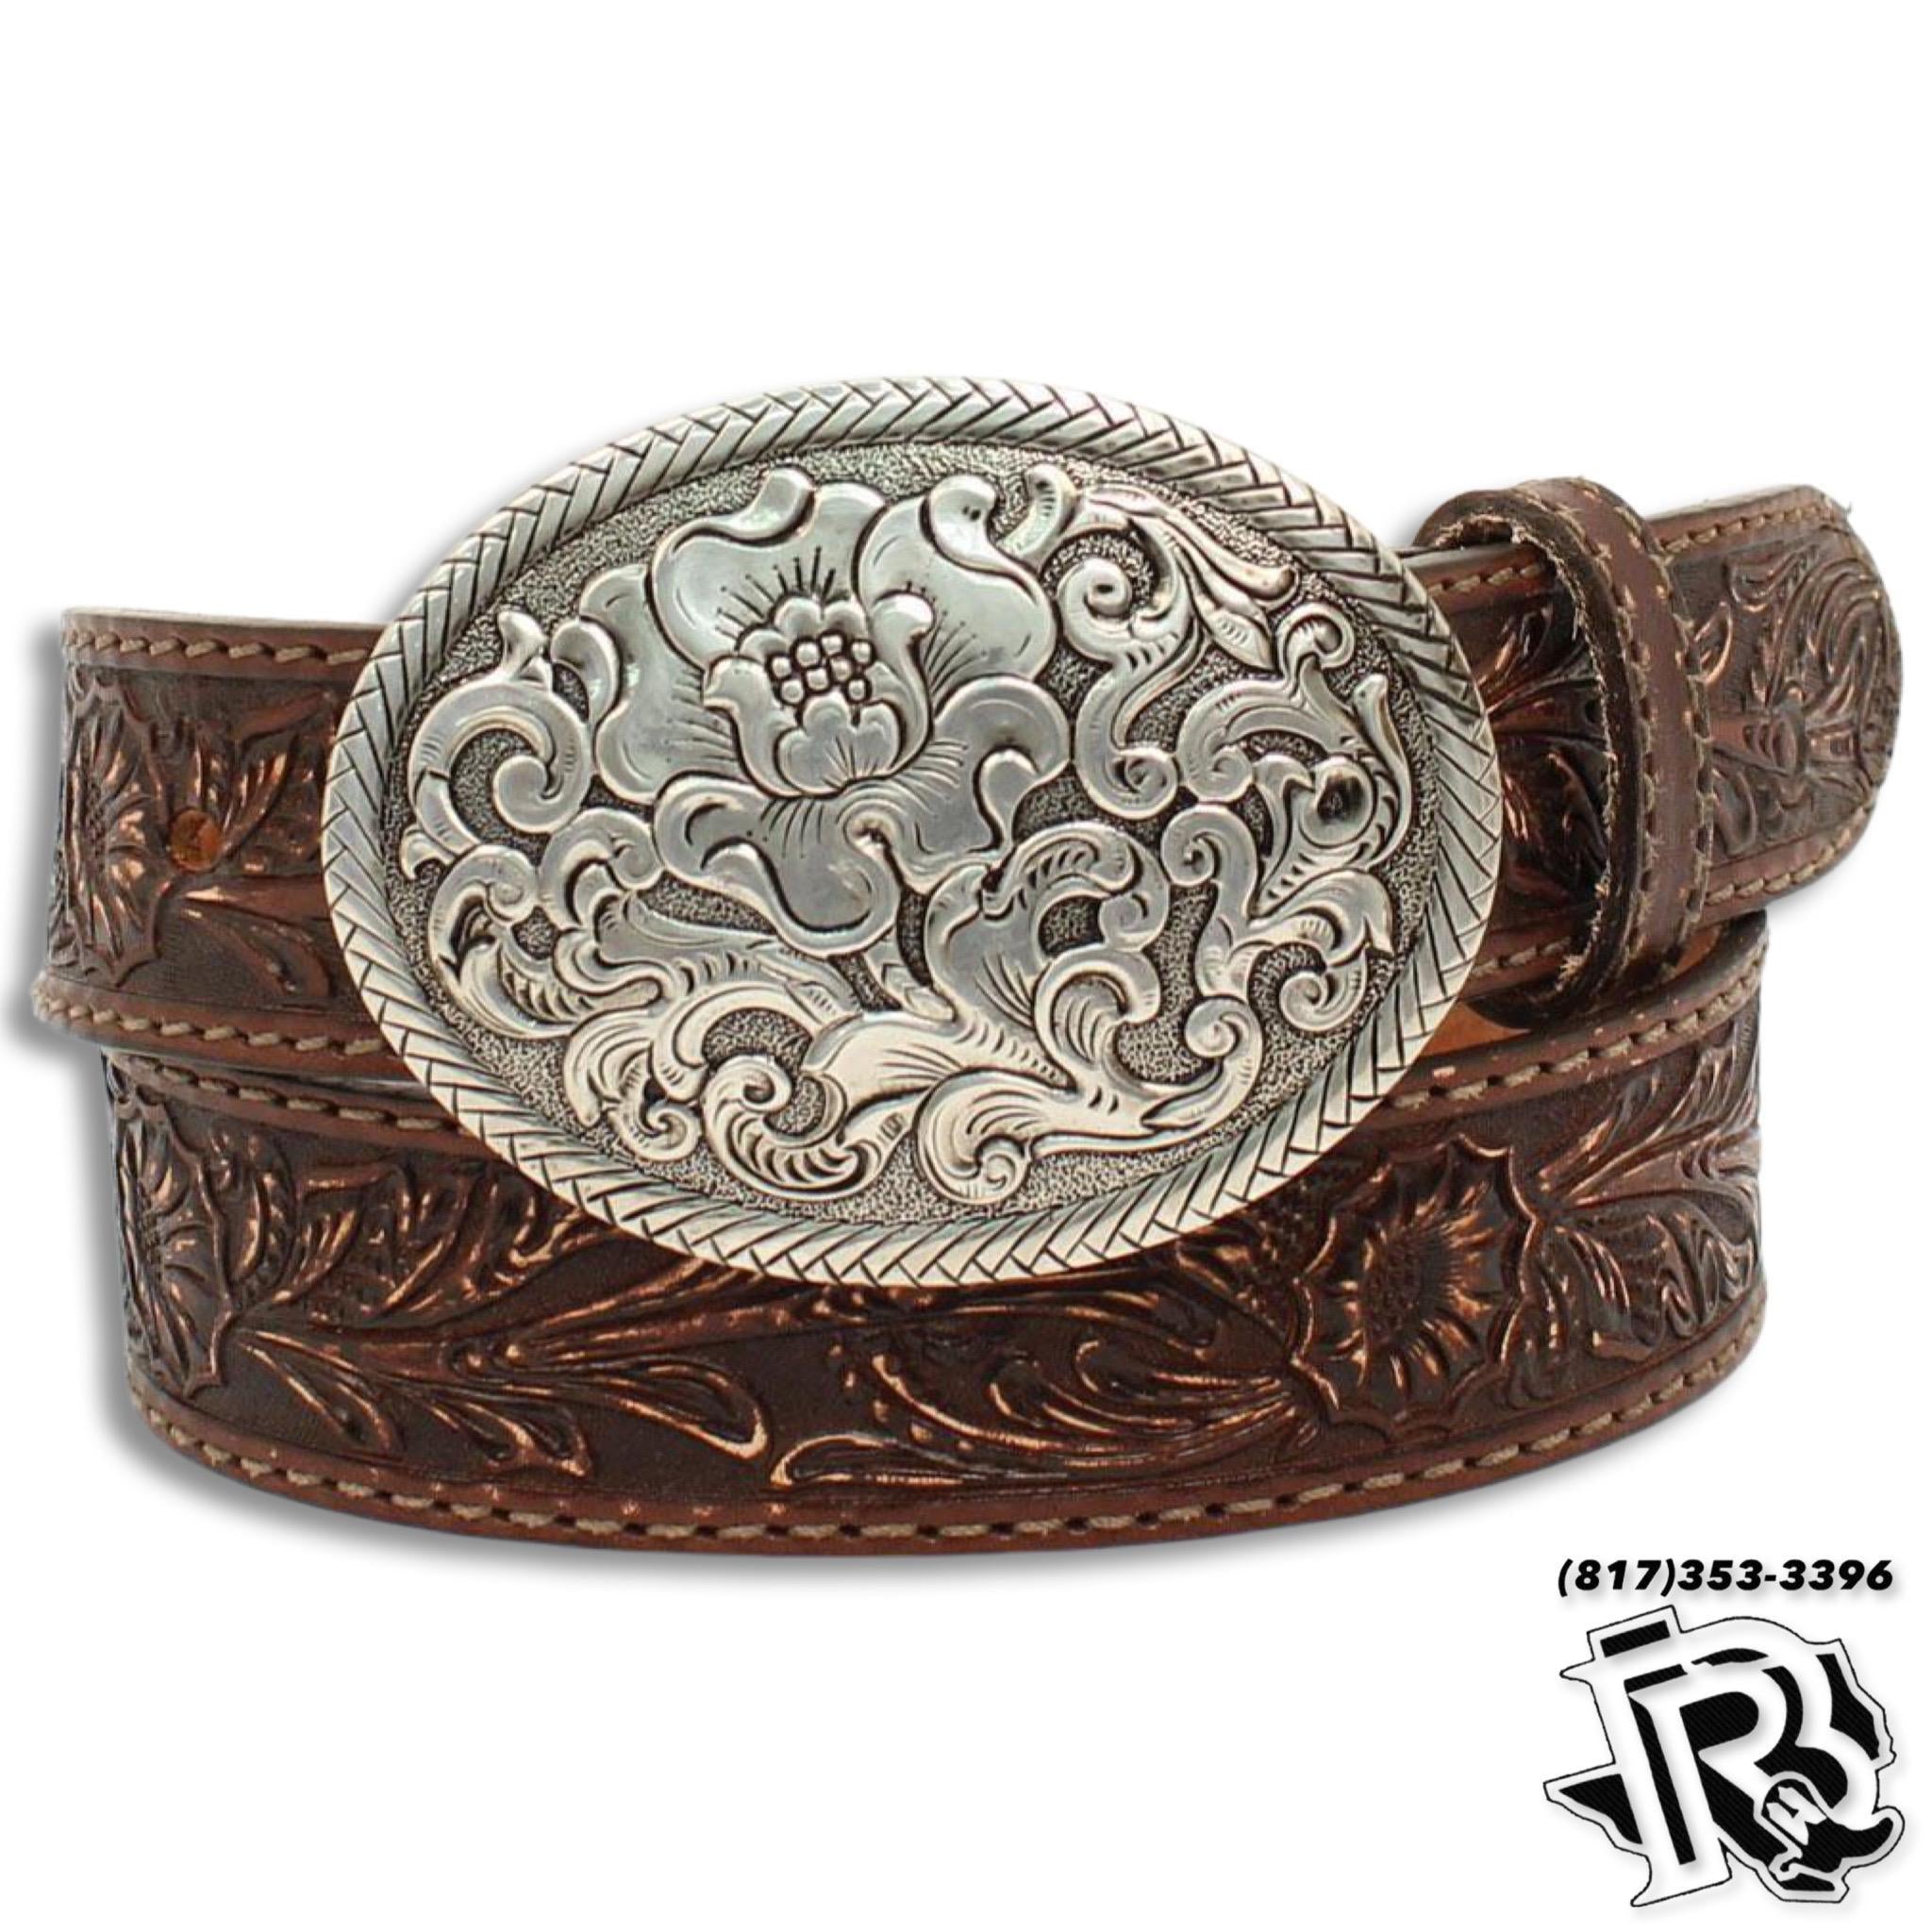 Nocona Women's Black Leather Belt with Studs – Branded Country Wear